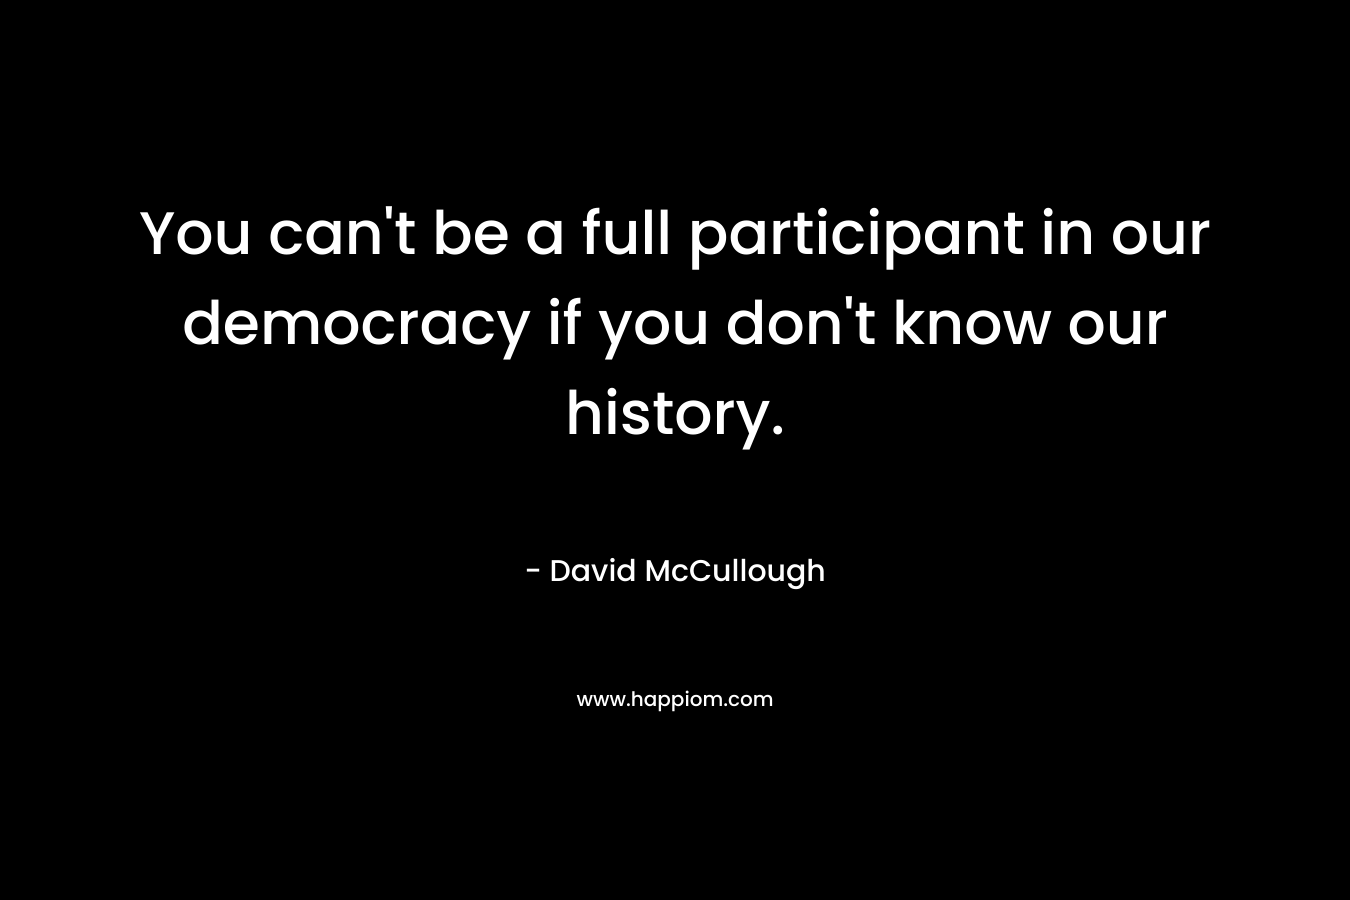 You can't be a full participant in our democracy if you don't know our history.